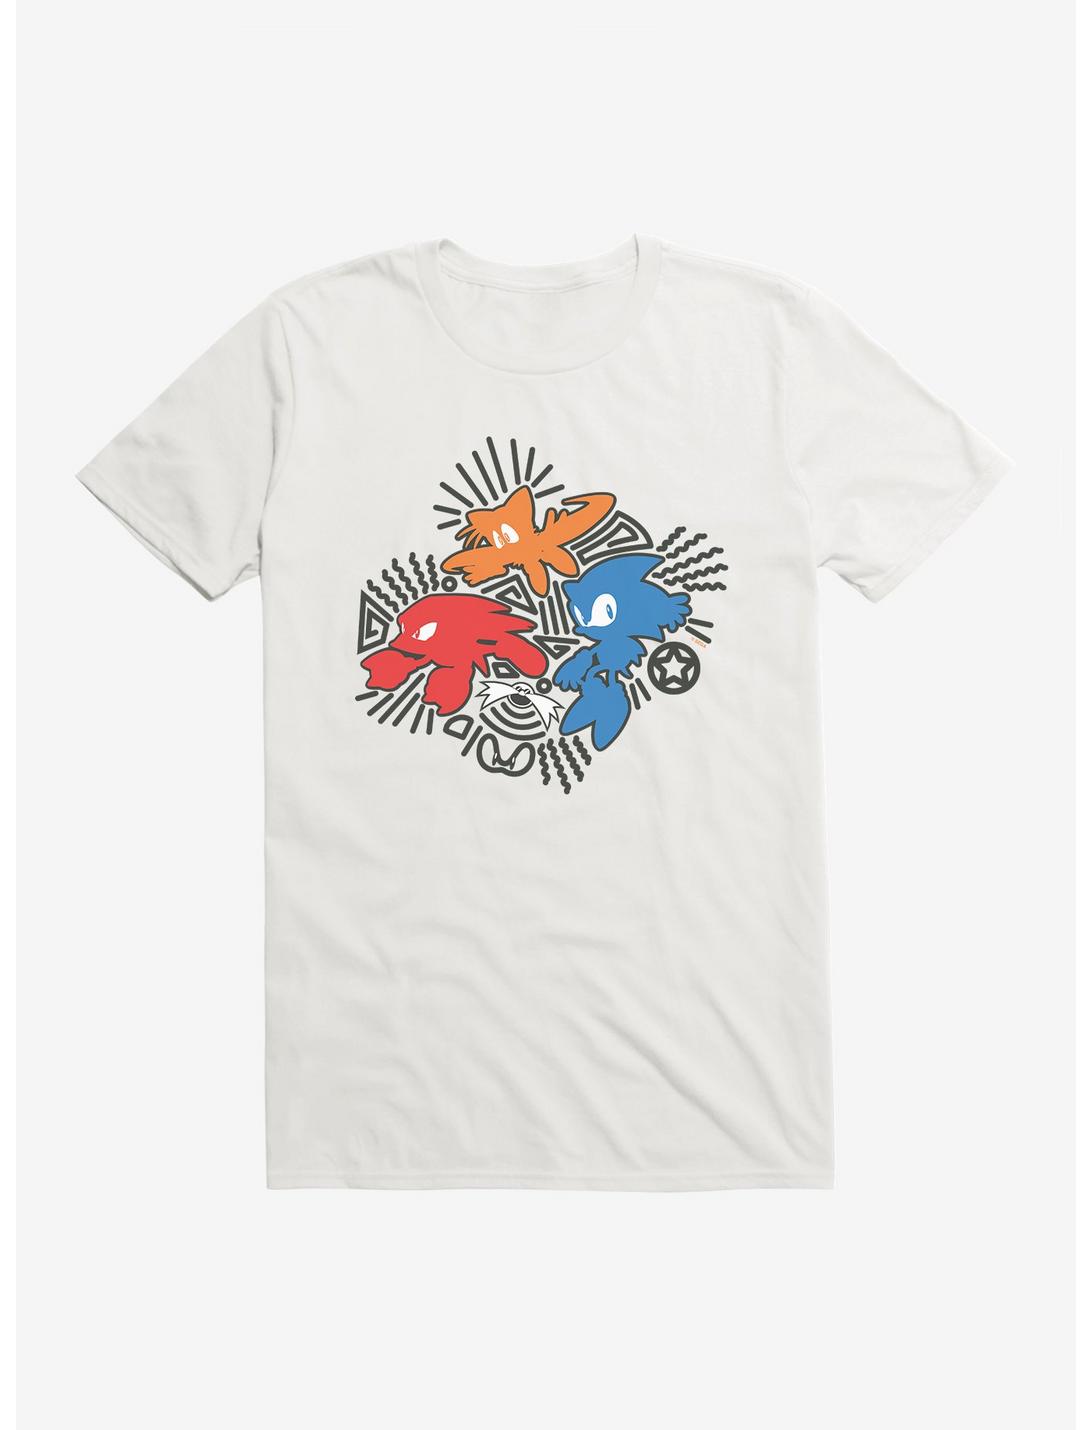 Sonic The Hedgehog Tails, Knuckles, Sonic, And Dr. Eggman Pop Art T-Shirt, , hi-res